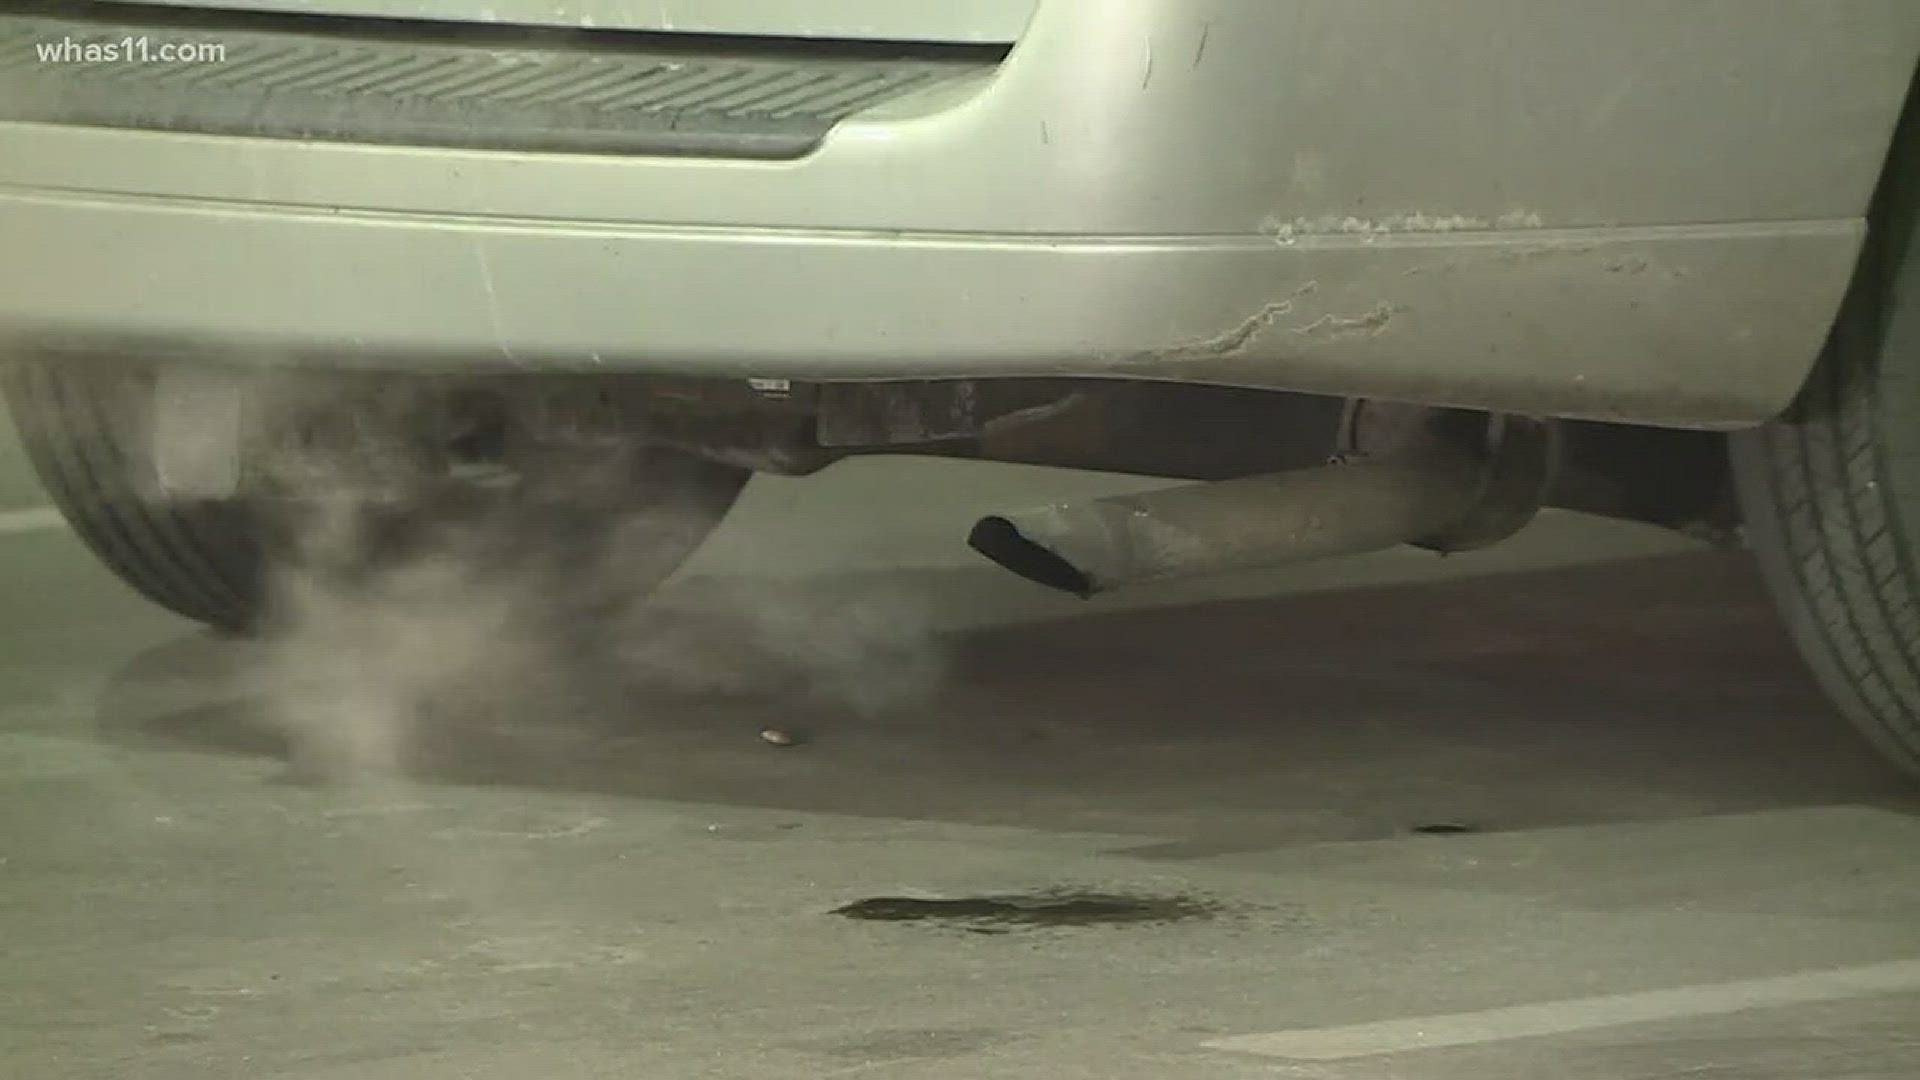 Does warming up your car really improve its performance? Our Verify team investigates